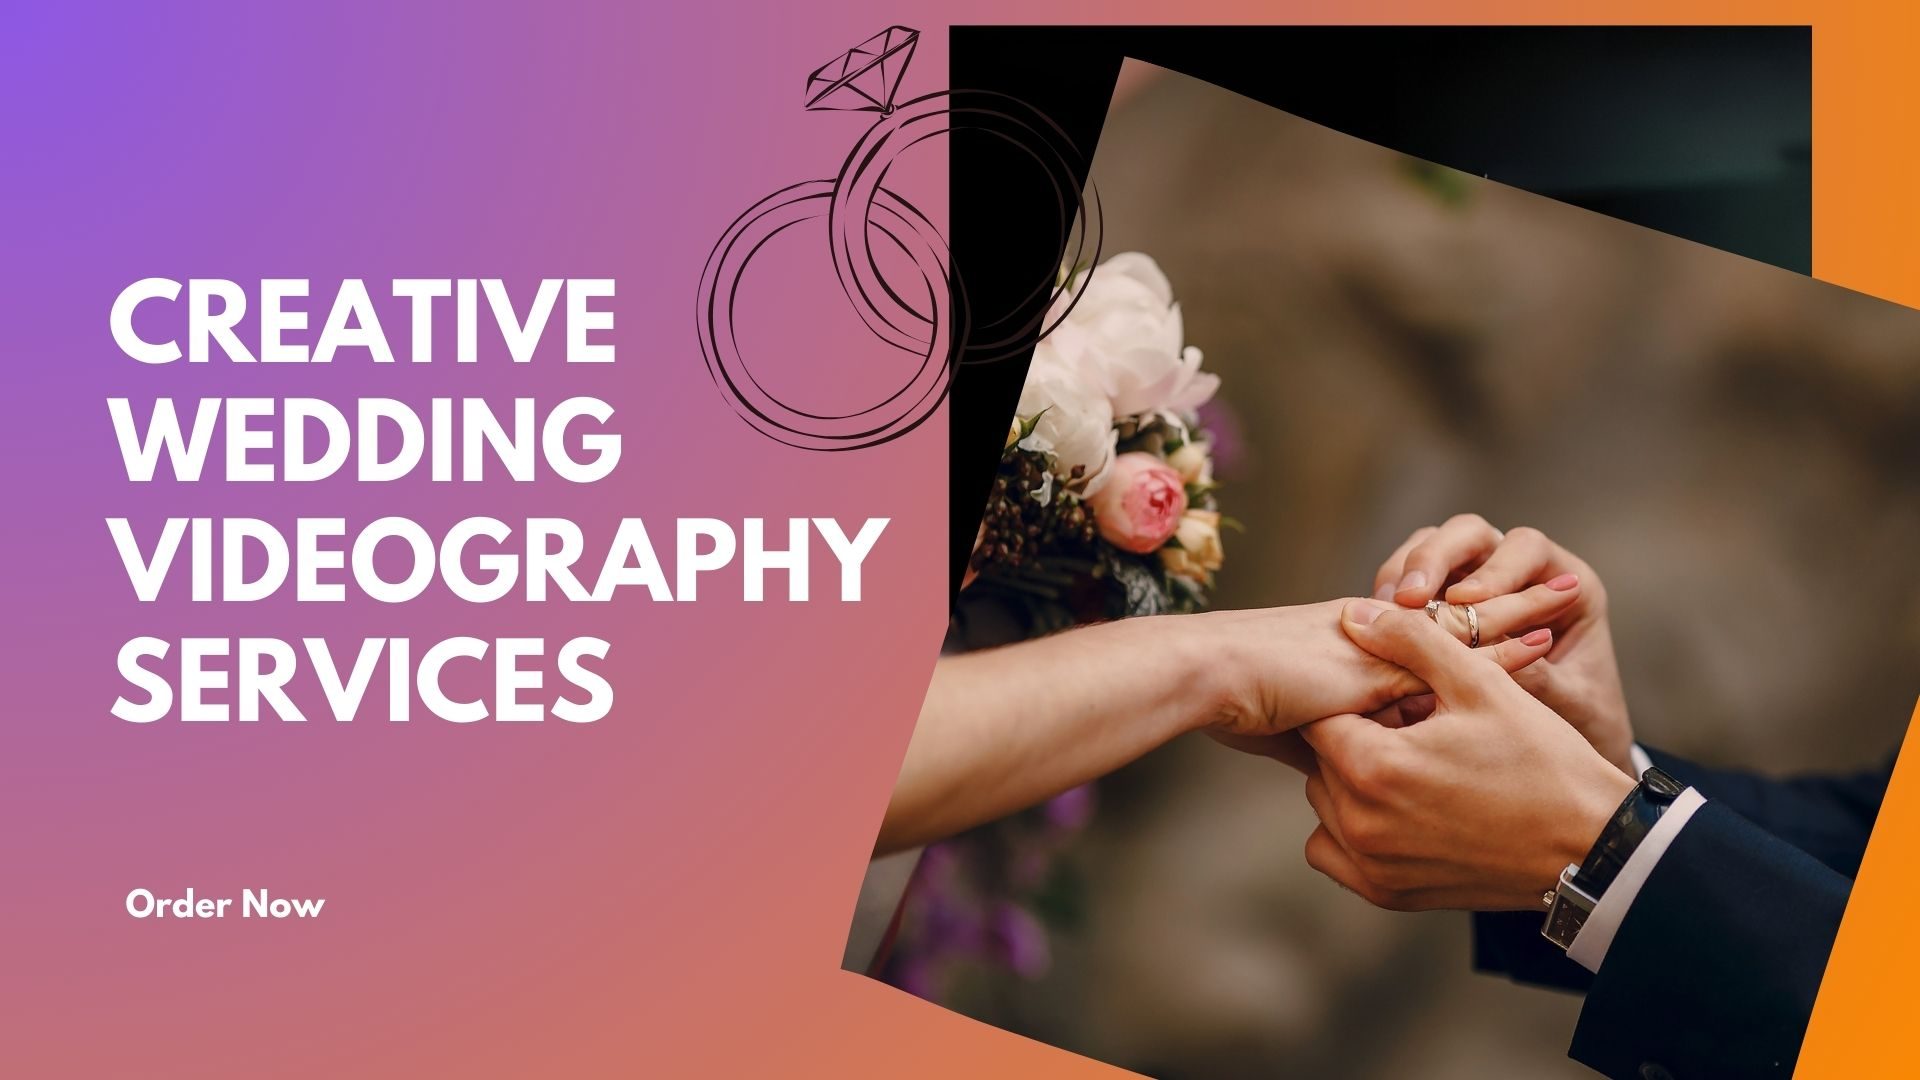 I Will Frame Your Forever Creative Wedding Videography Services